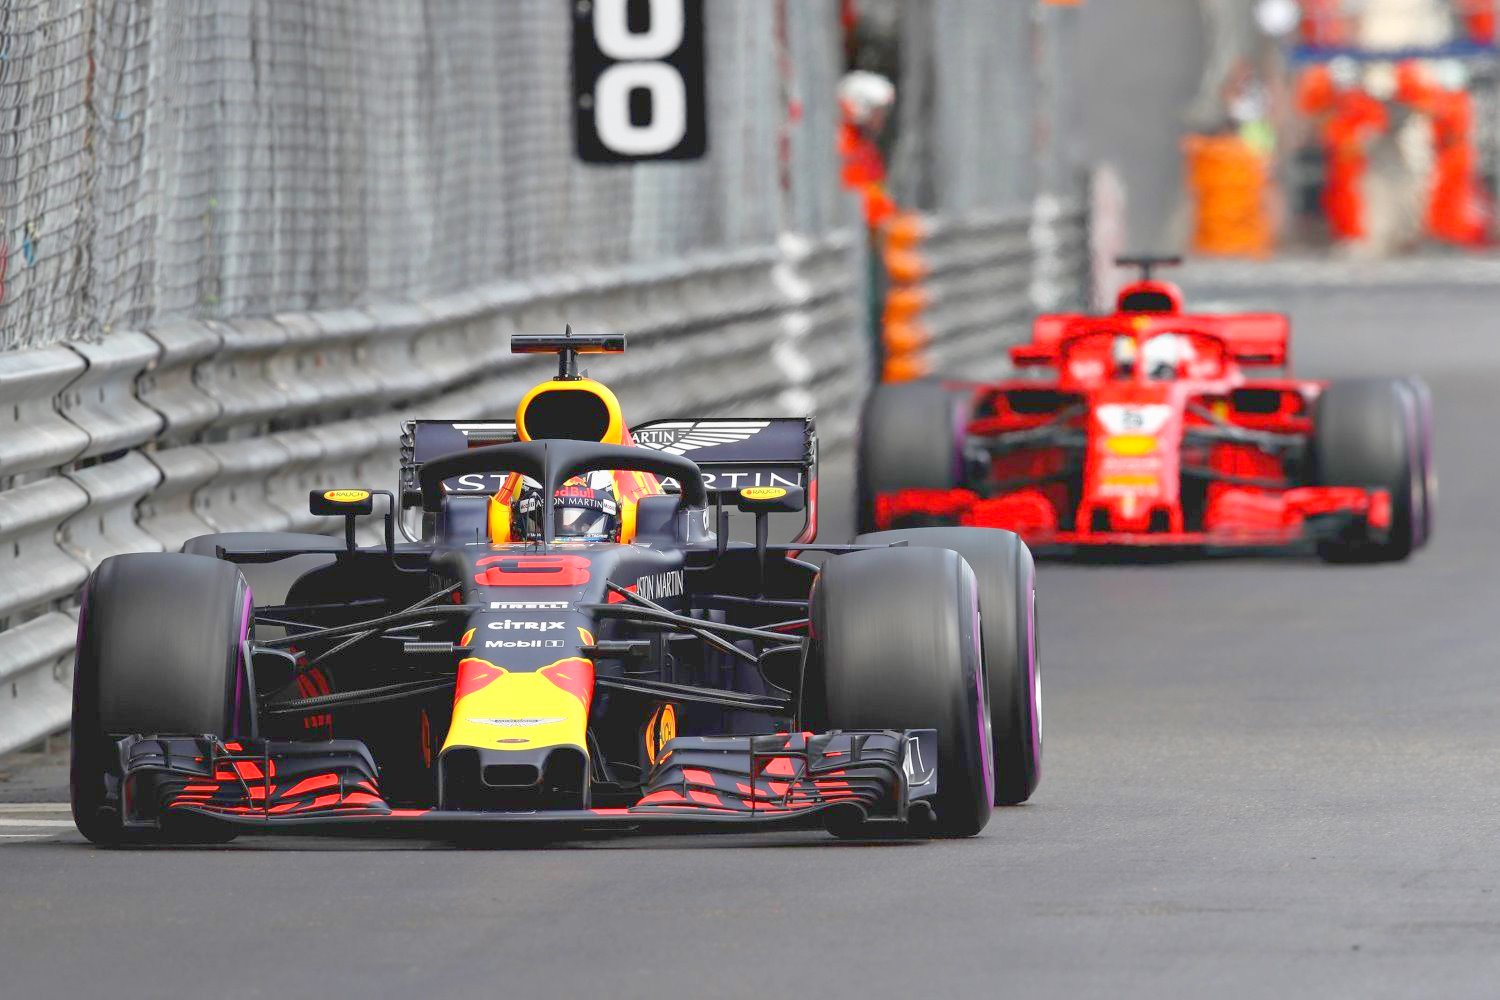 Ricciardo had a fried MGU-H unit in Monaco and still the other drivers could not pass on the Mickey Mouse circuit